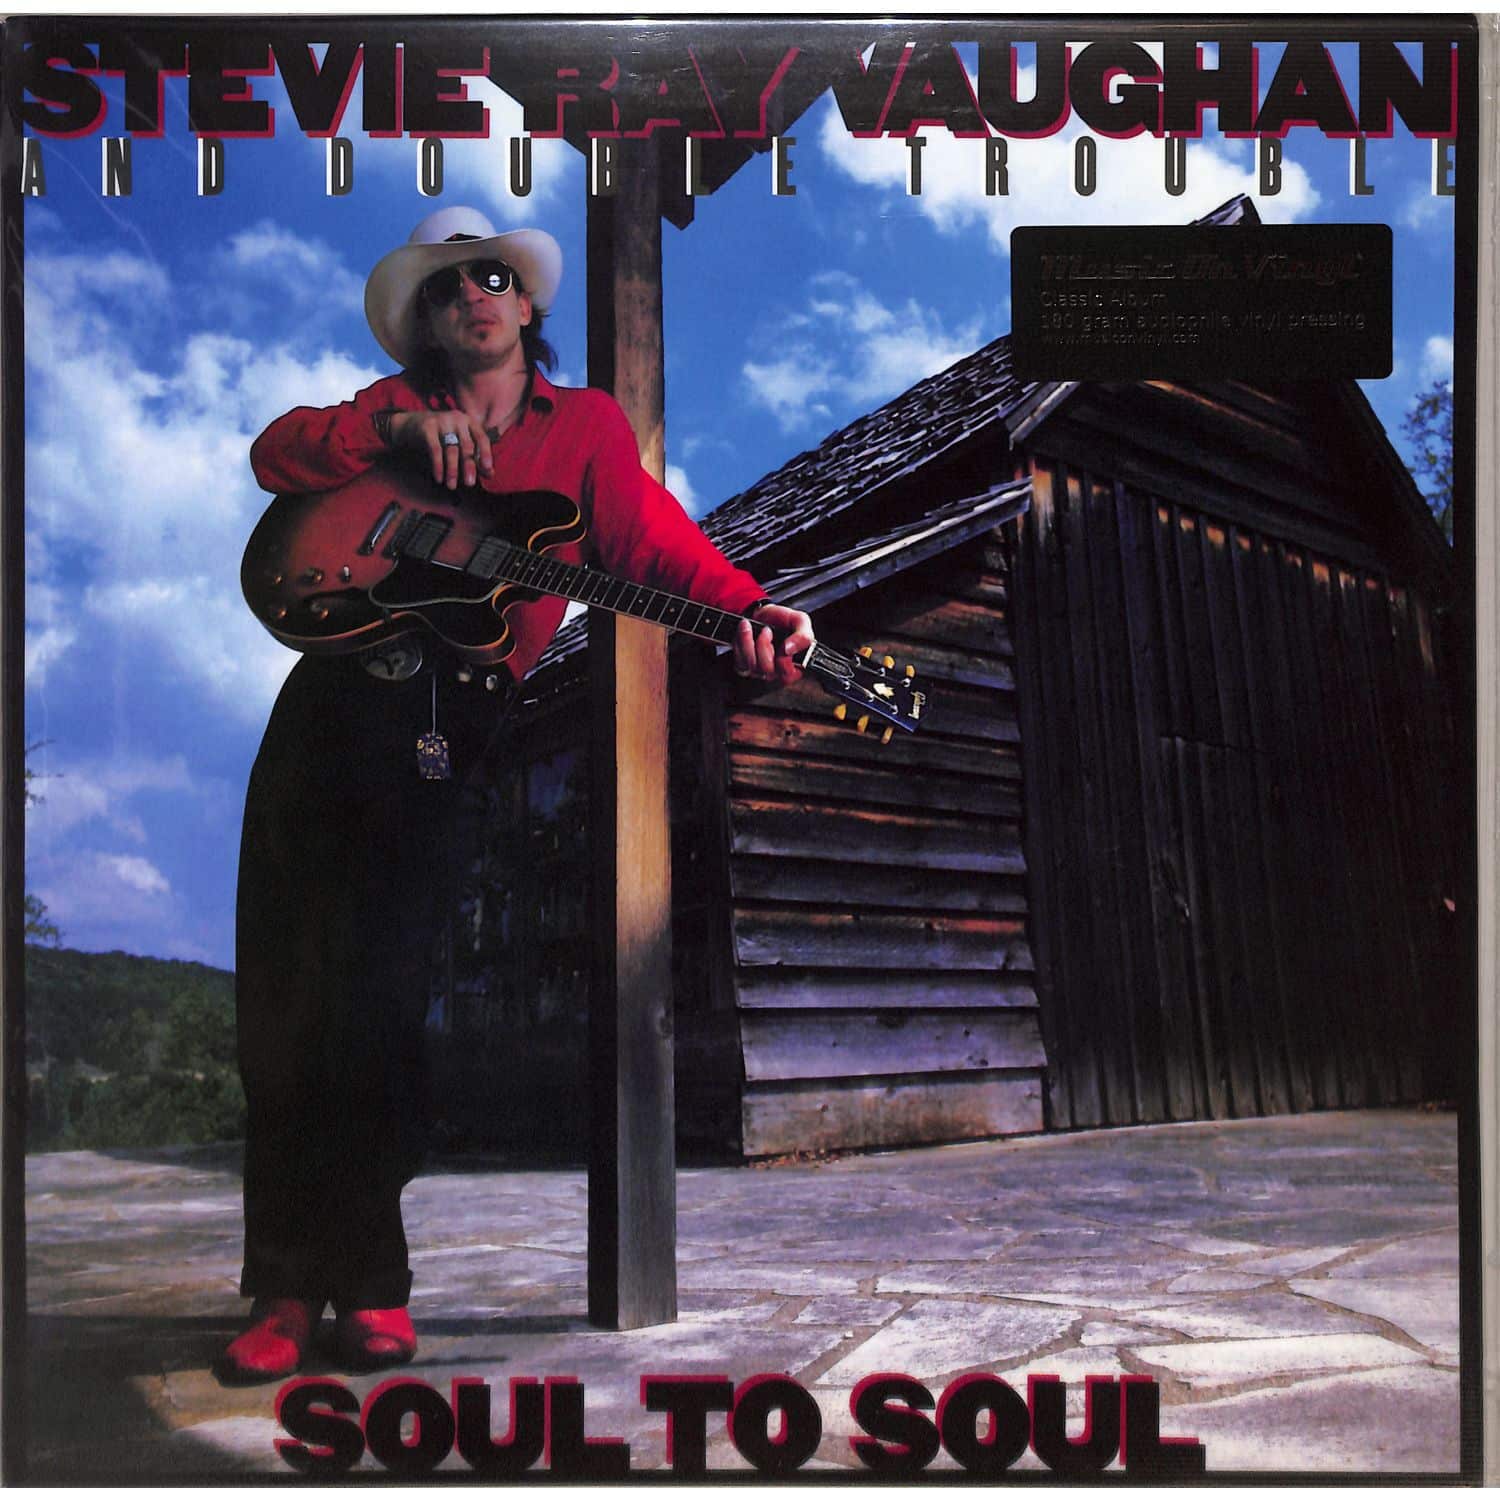 Stevie Ray Vaughan - SOUL TO SOUL 